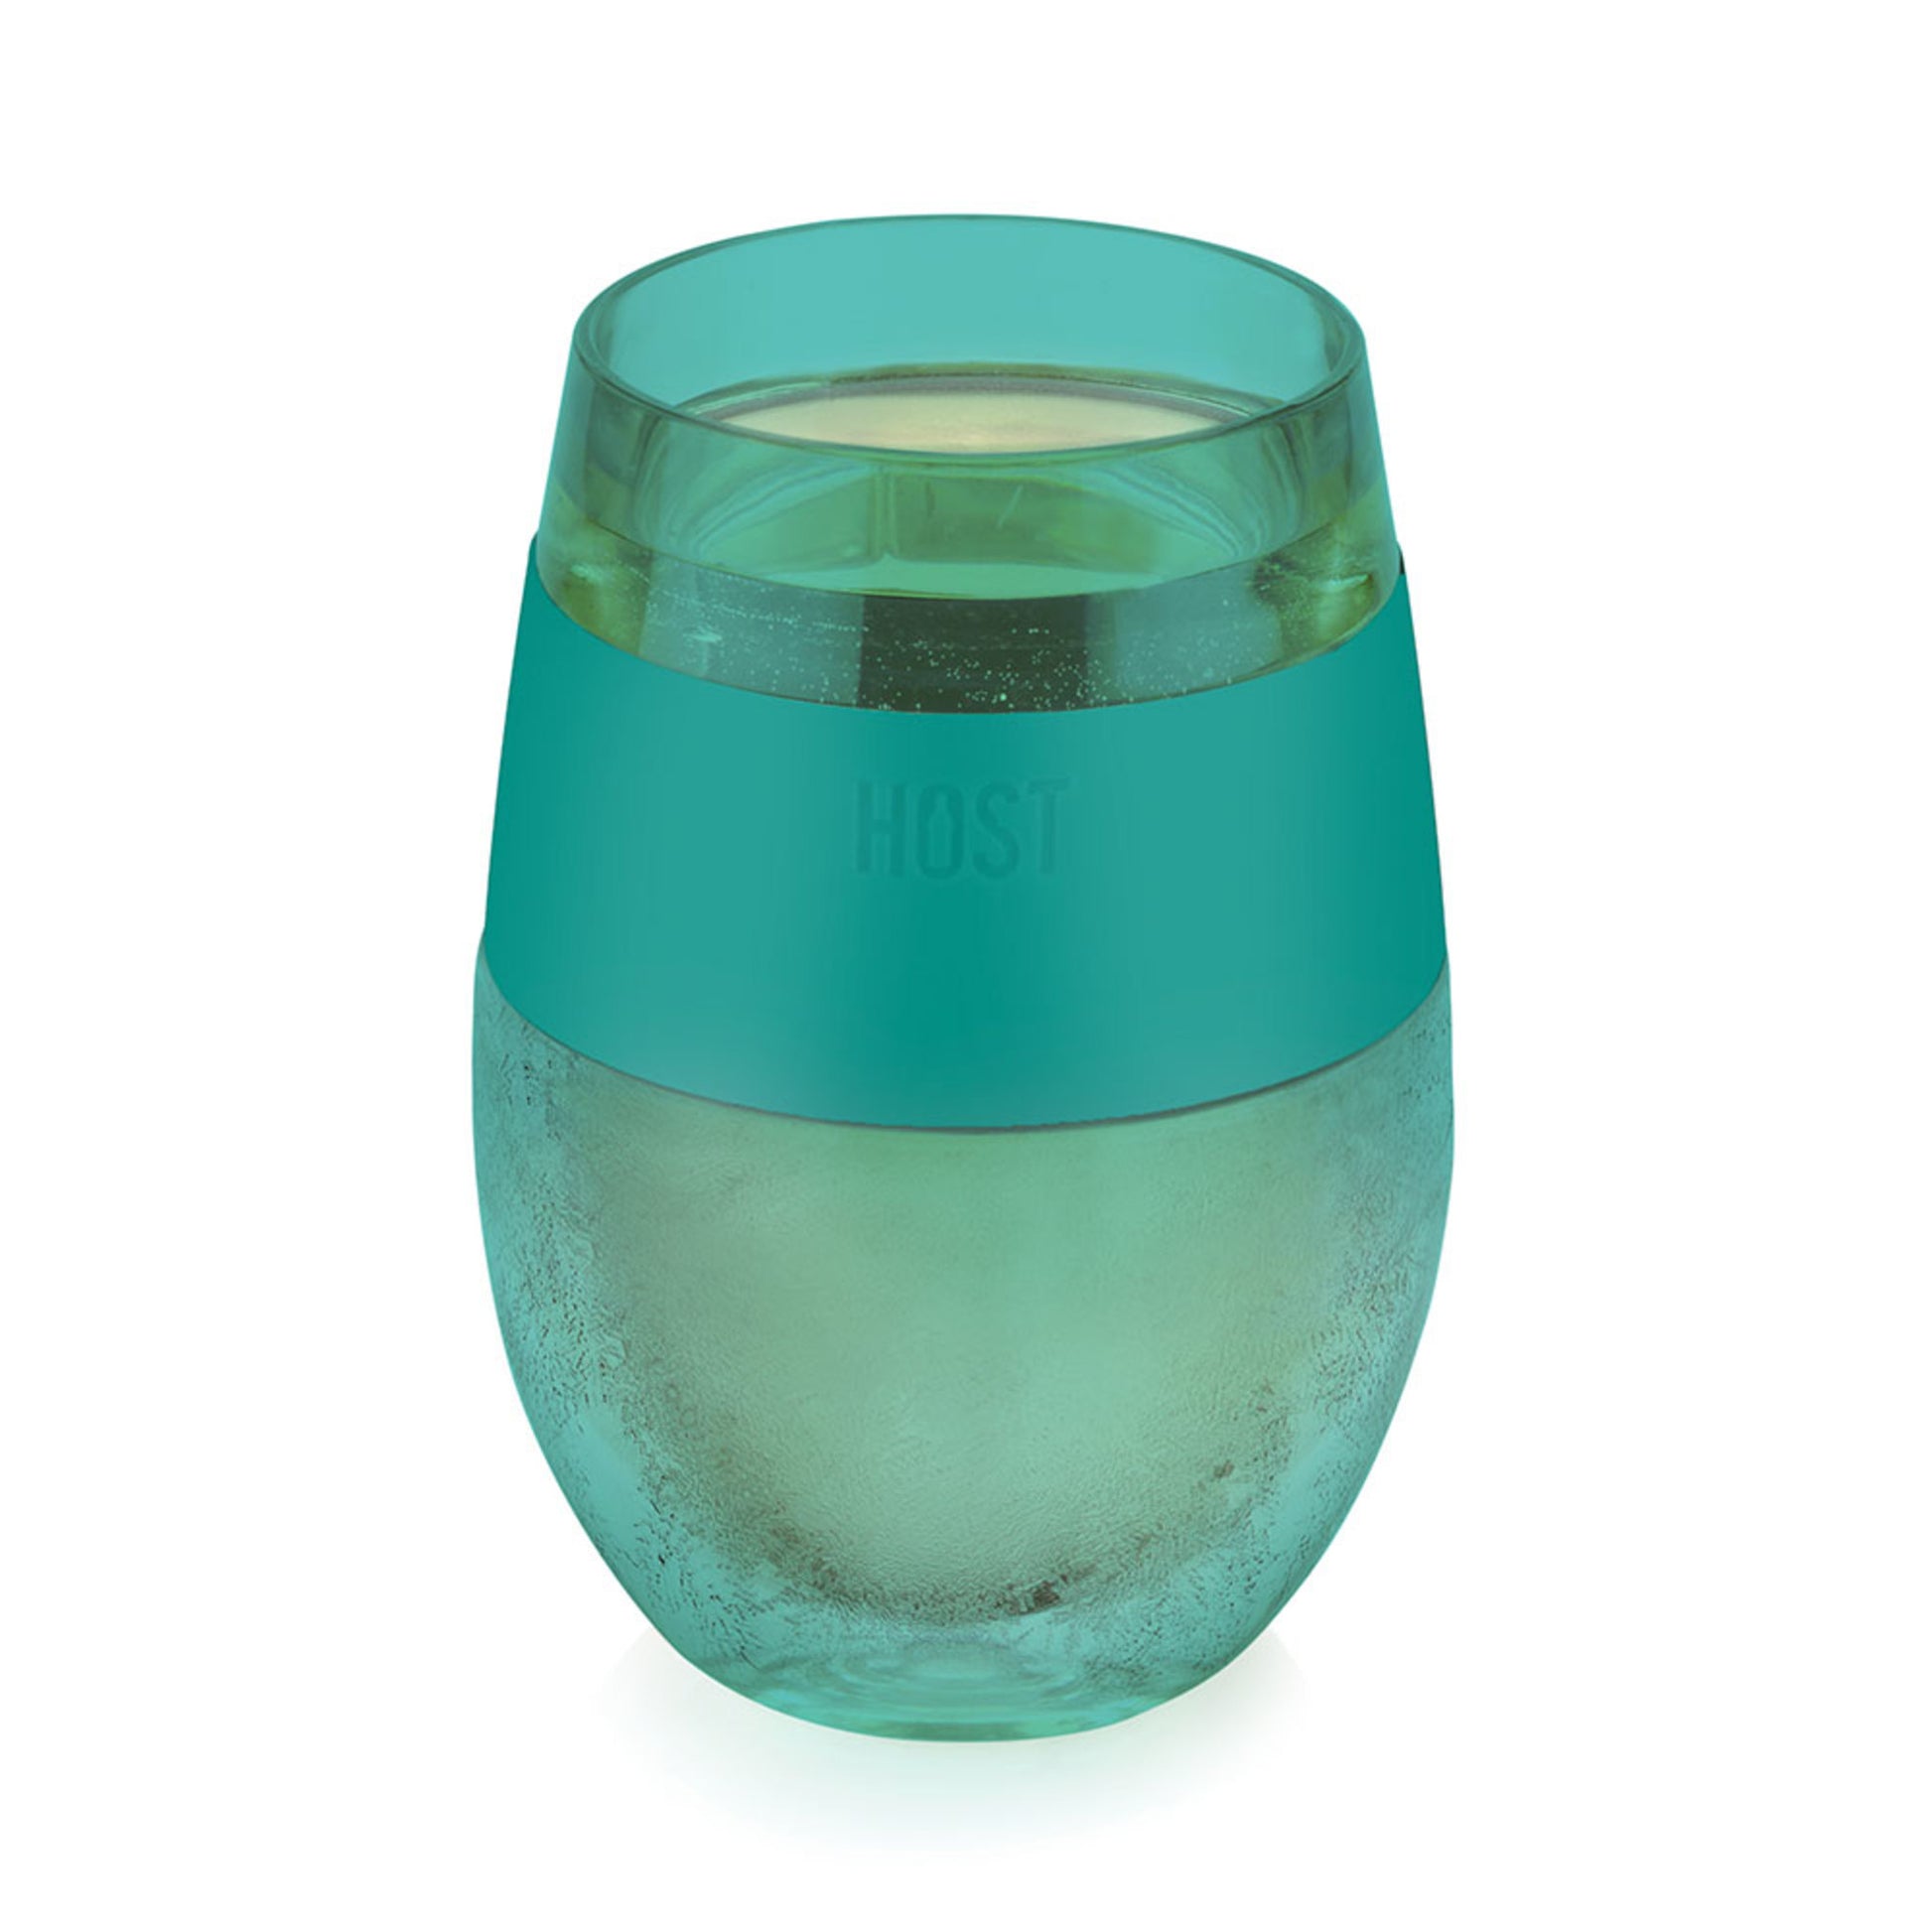 Wine FREEZEâ„¢ Cooling Cup in Translucent Green by HOSTÂ®-0